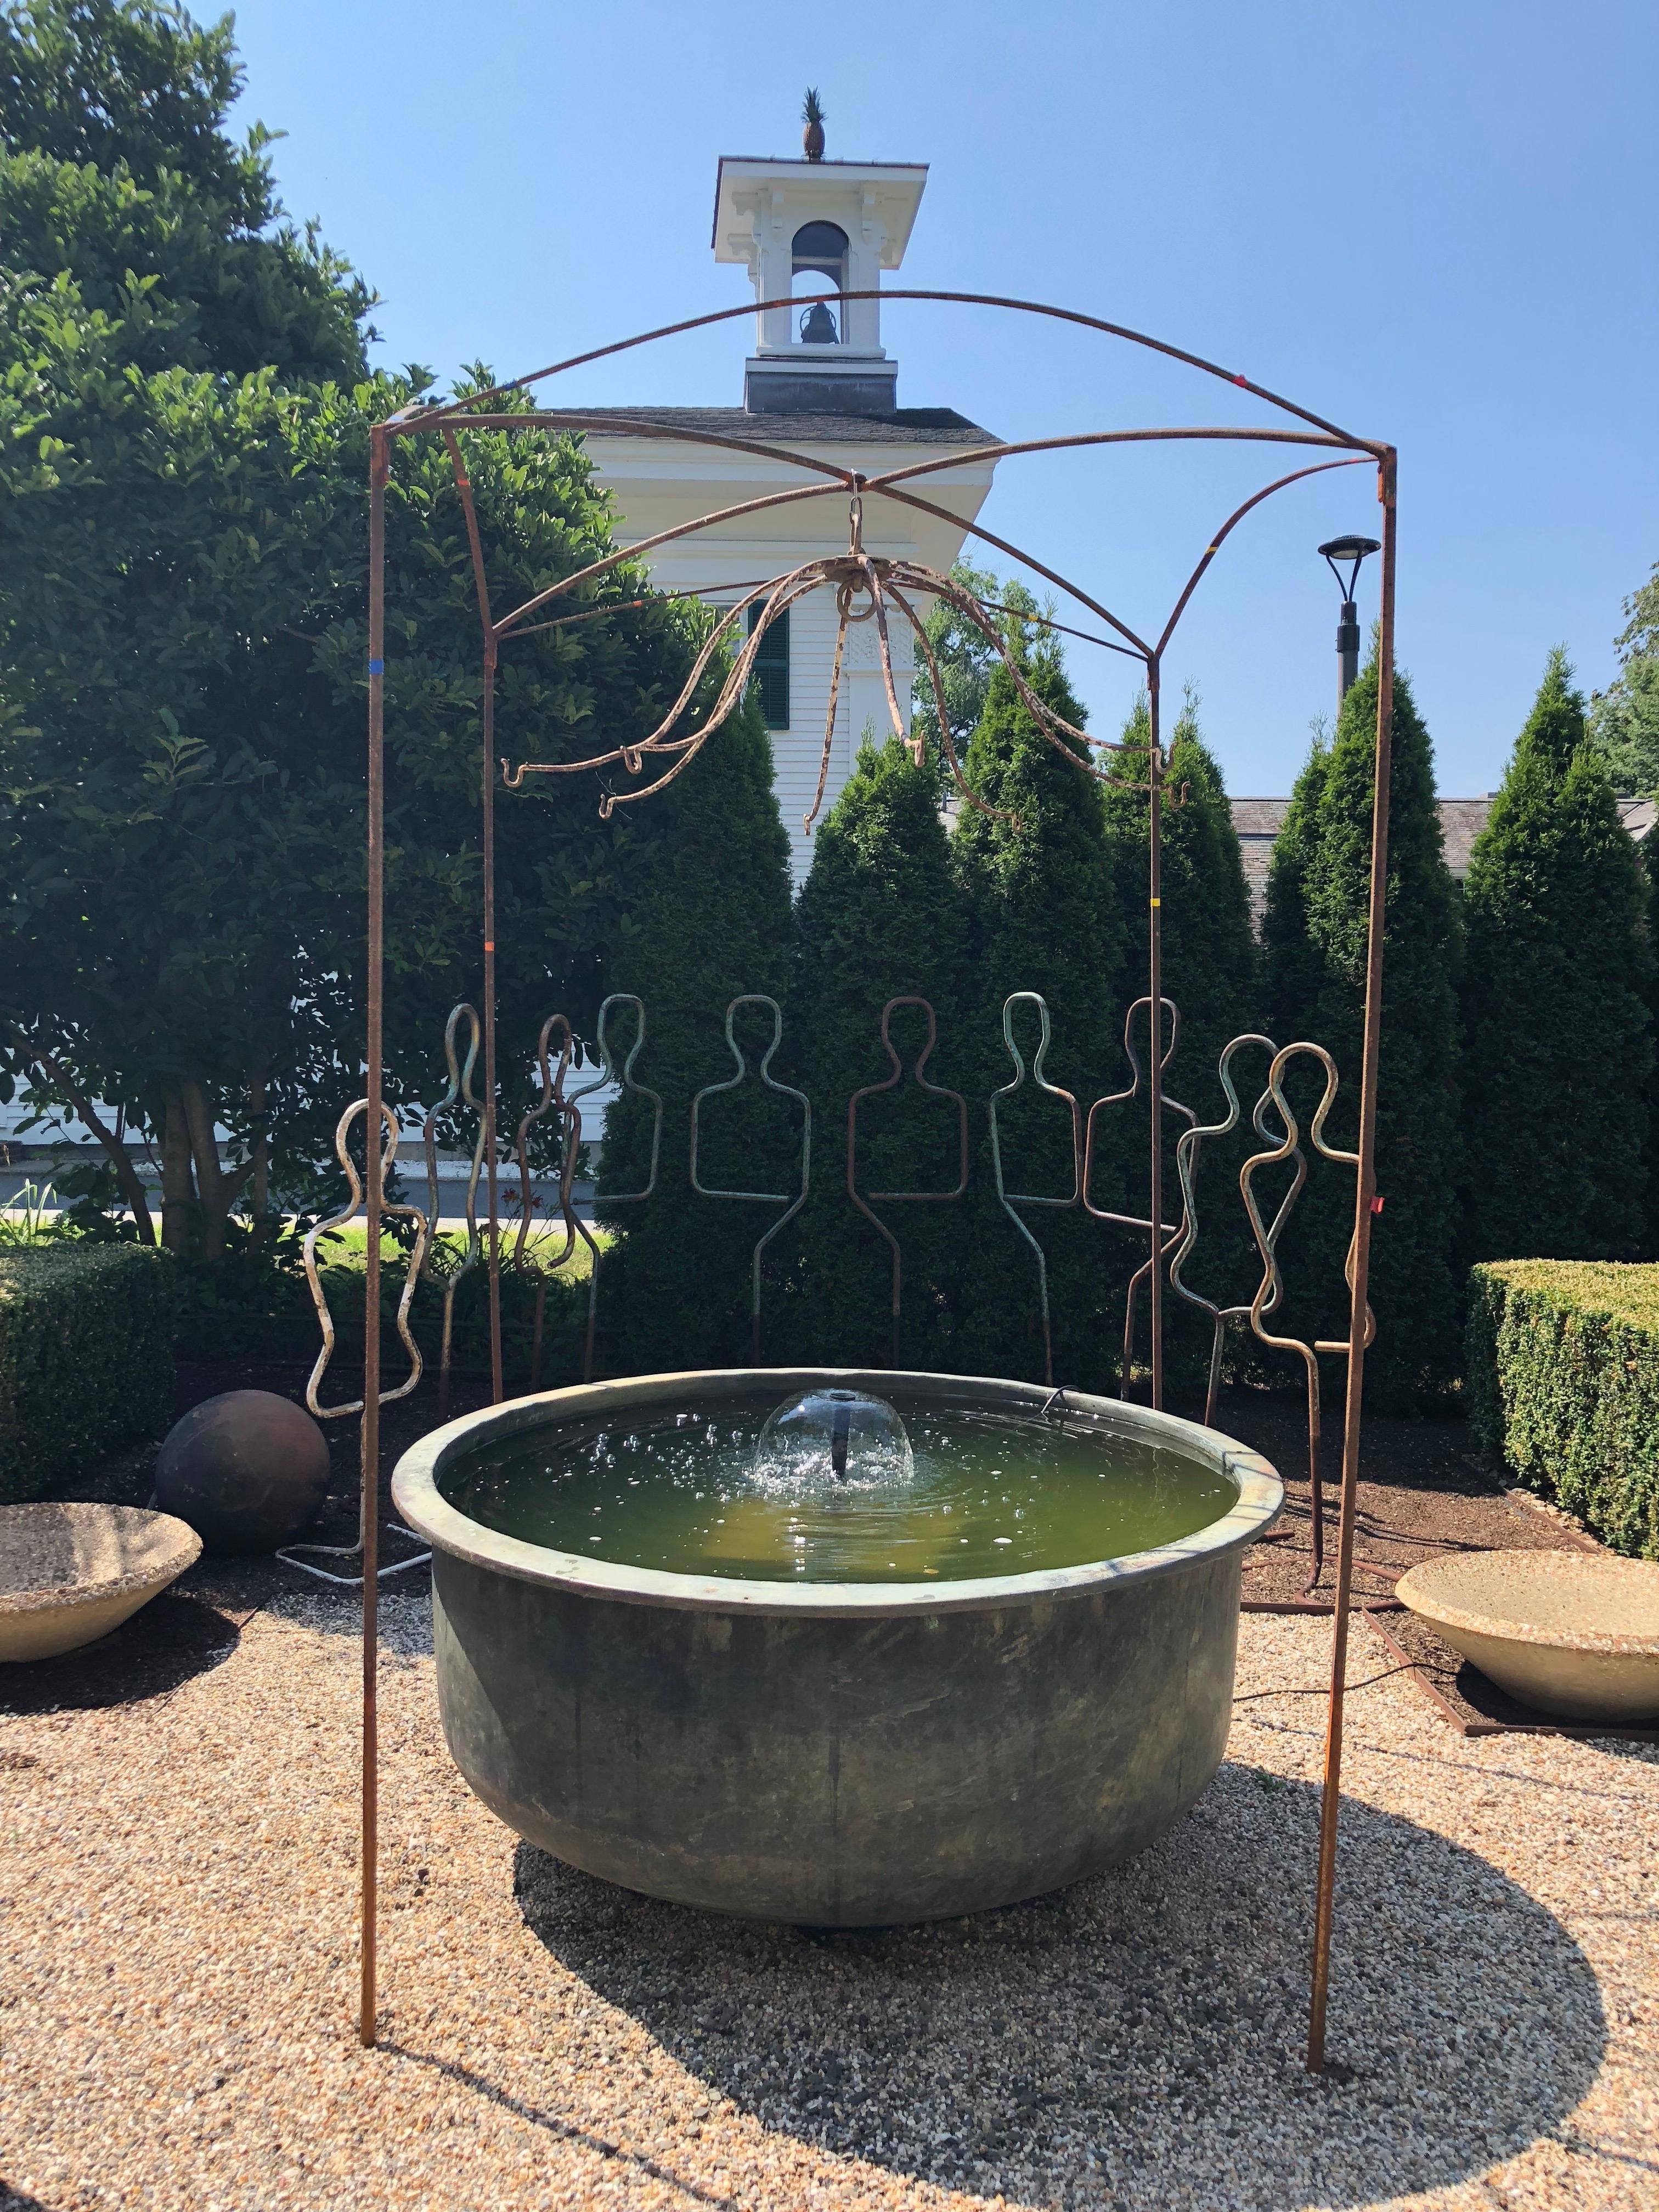 This combination of pieces is truly stunning. The 19th century square wrought iron arbor has been heightened by seamlessly adding several feet of matching pointed steel stakes to each leg that makes insertion into the ground a breeze. The